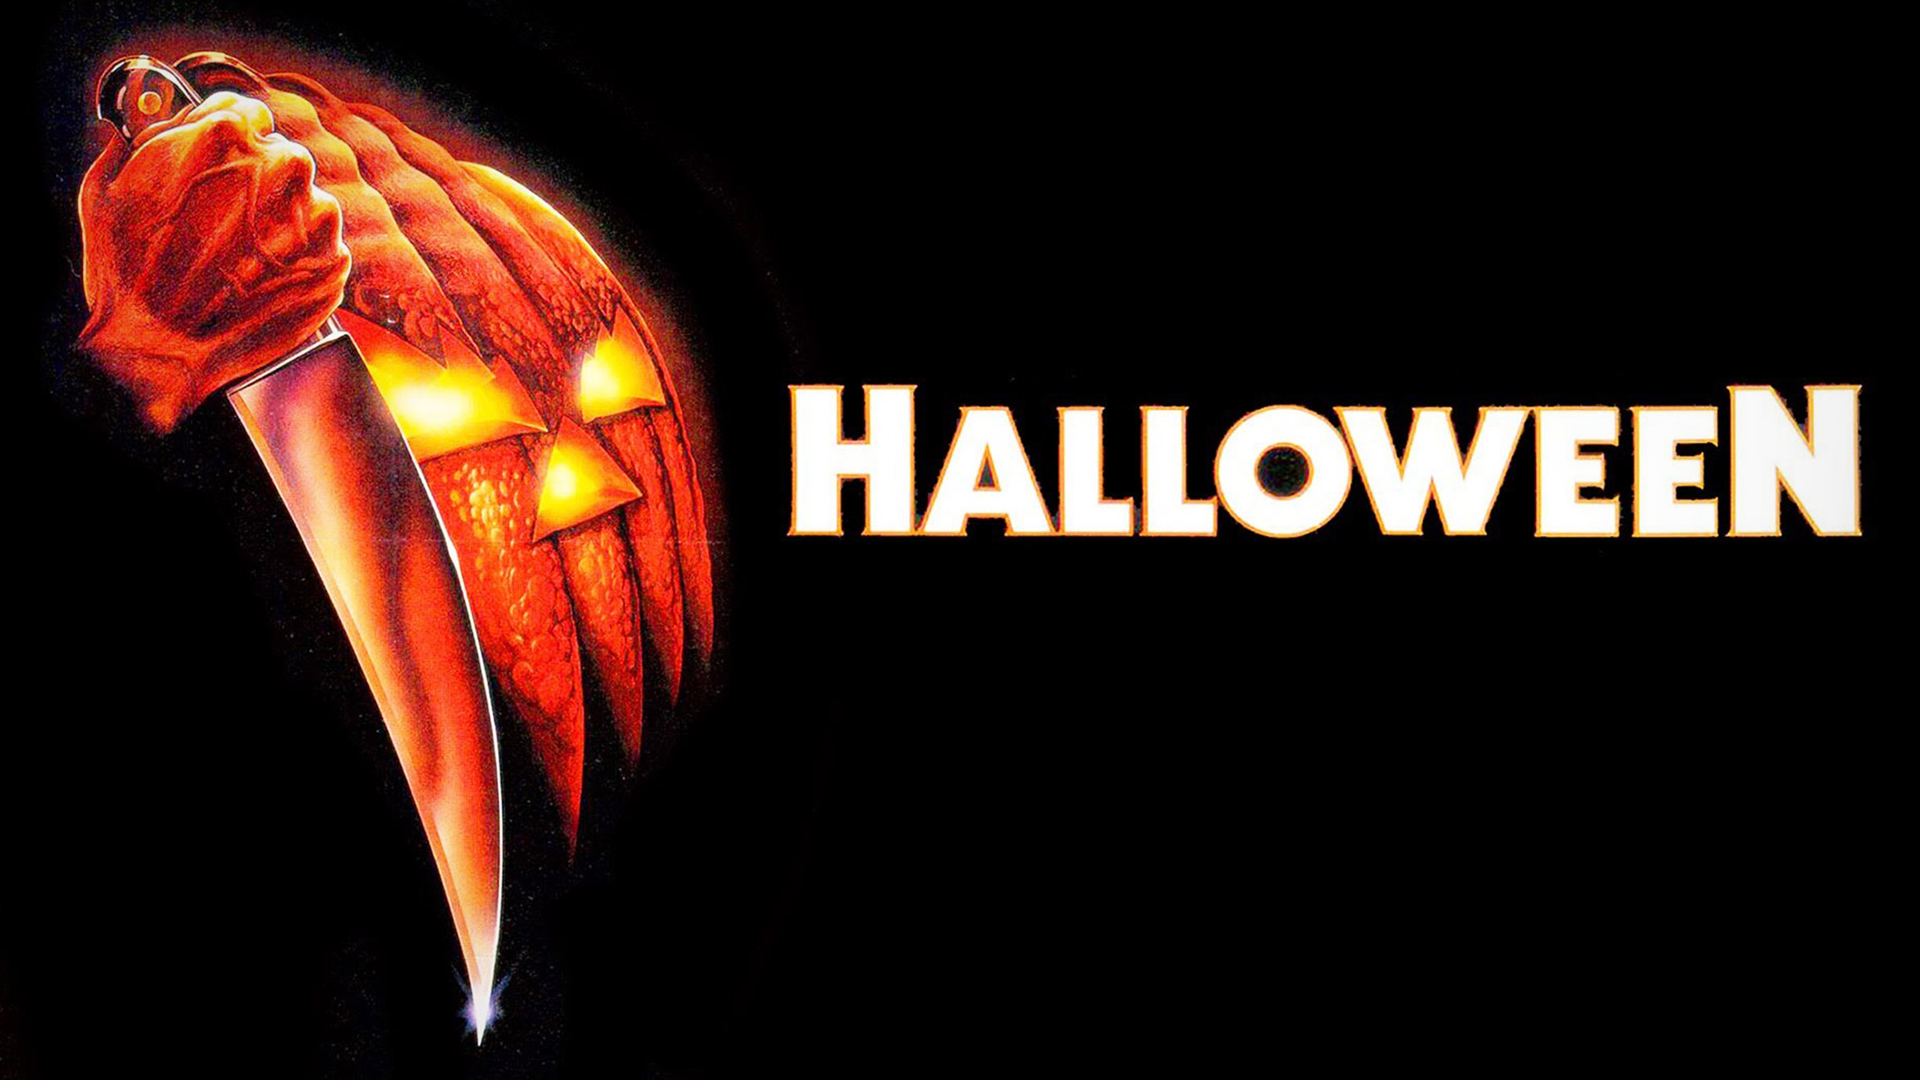 Halloween The 5 Best Halloween Movies Of All Time